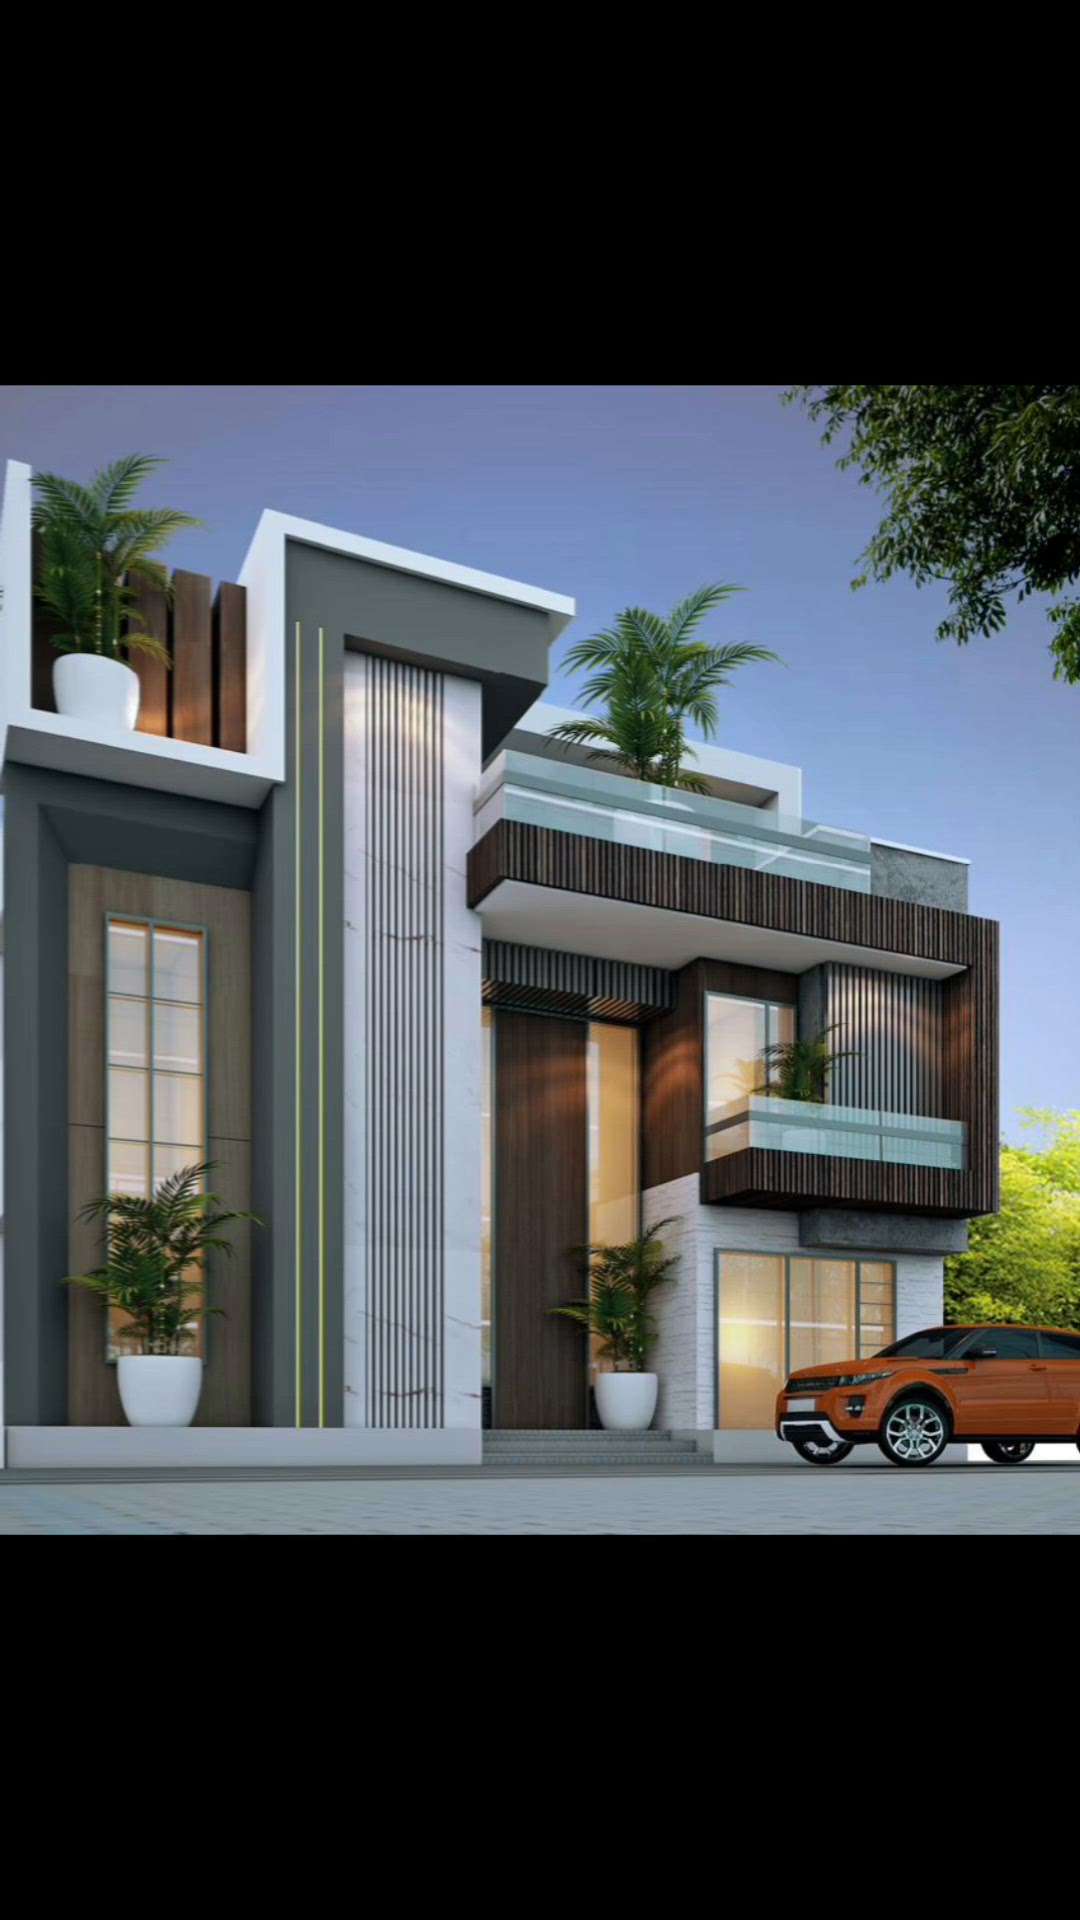 3D Design front Elevation
8077017254
 This is the 3D elevation design of my new site.  What do you guys say about this?
 #3d  #achitecture  #architecturedesigns  #exterior_Work  #exteriordesigns  #interior  #LUXURY_INTERIOR  #Architectural&Interior